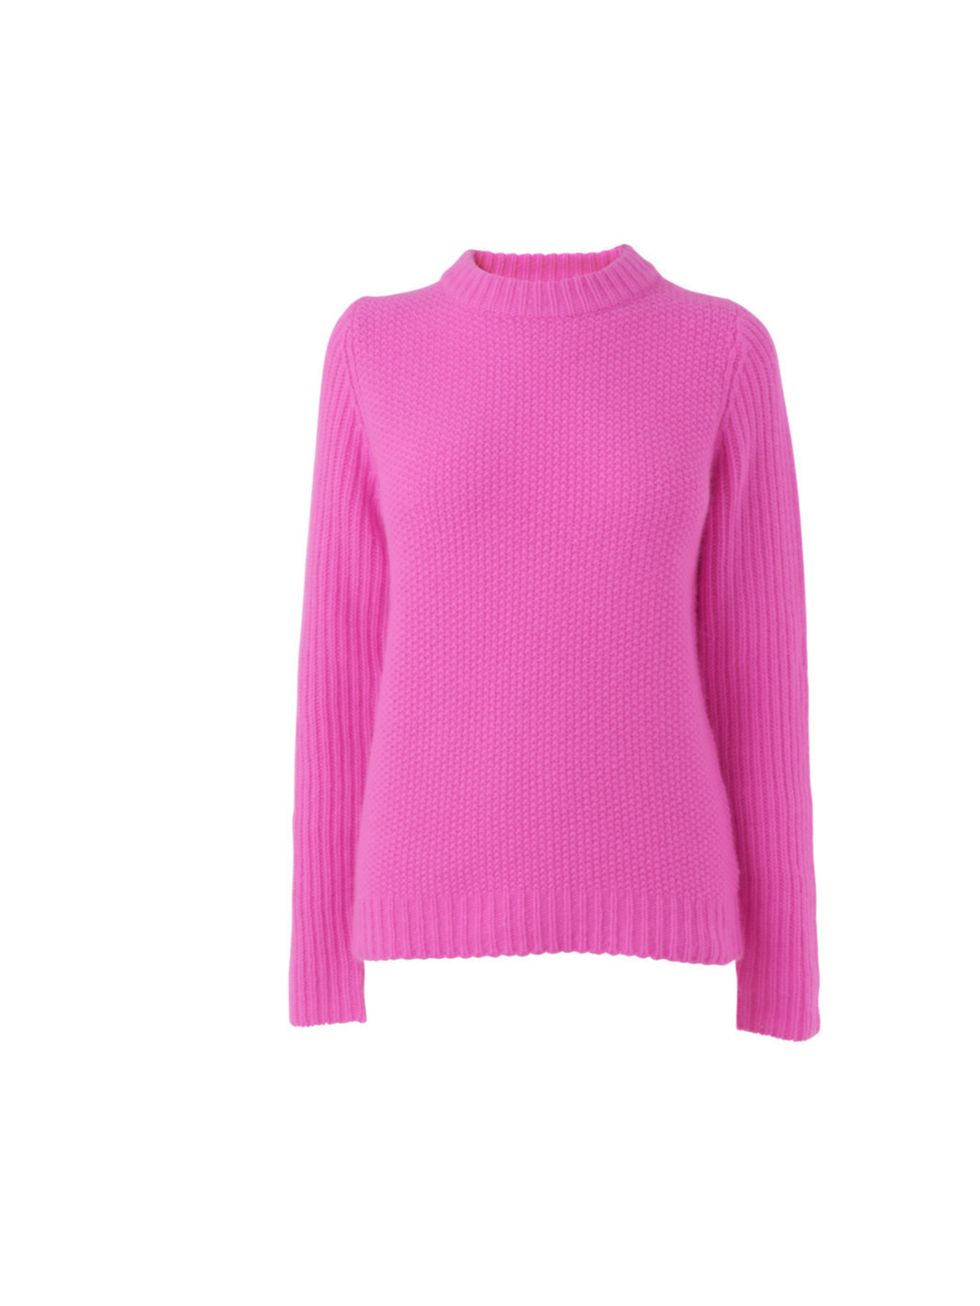 <p><a href="http://www.jaeger.co.uk/">Jaeger</a> neon knitted jumper, was £140, now £90</p>